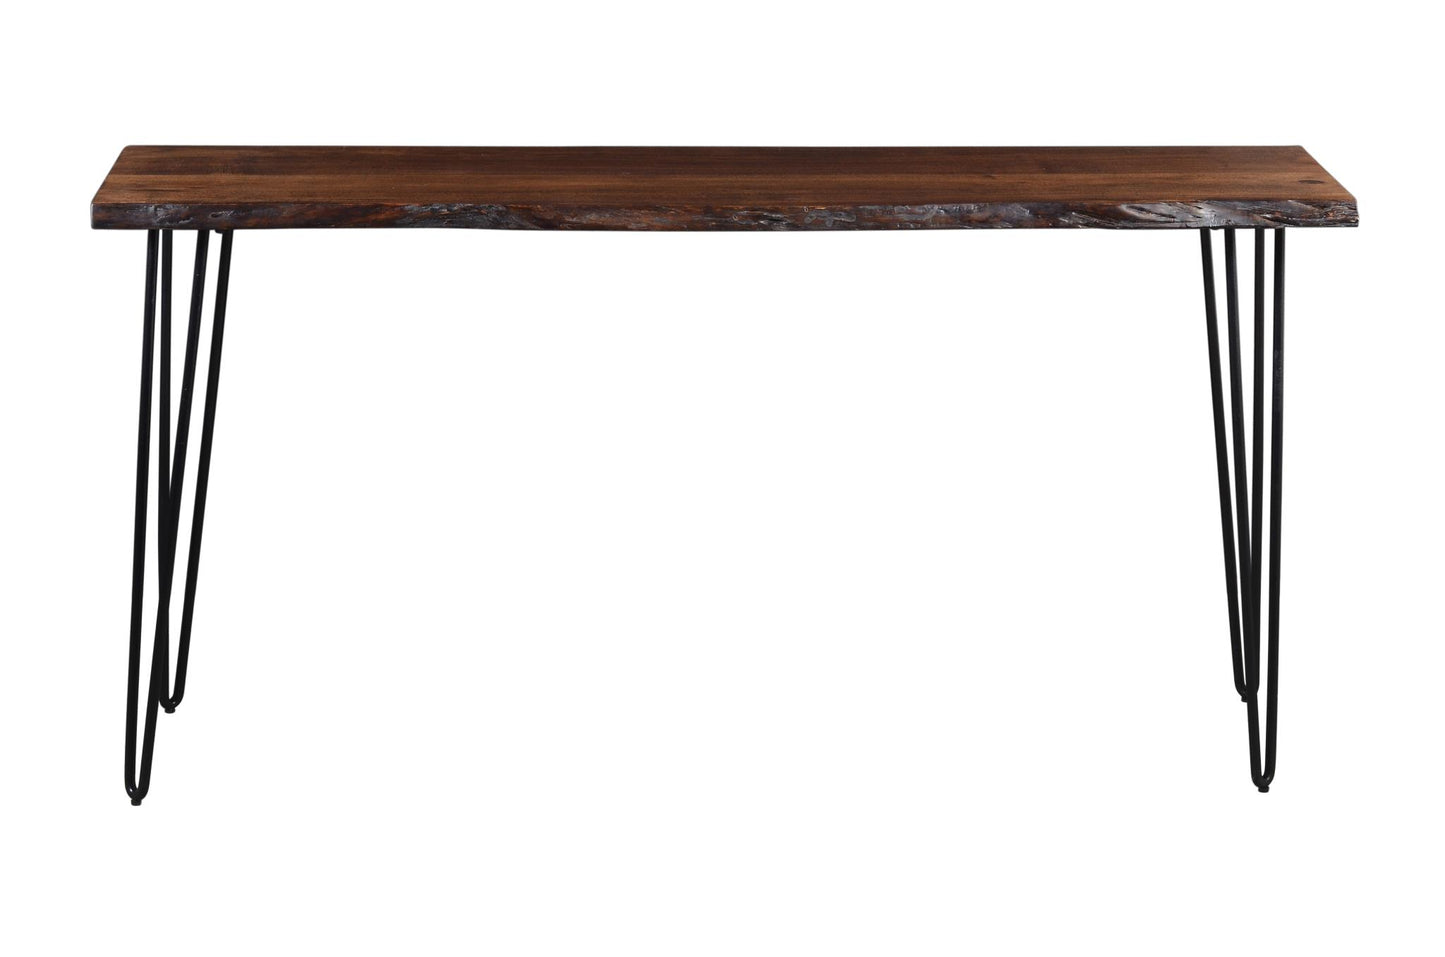 Natures Edge Light Chestnut Dining or Sofa Table Counter Height 72" Long